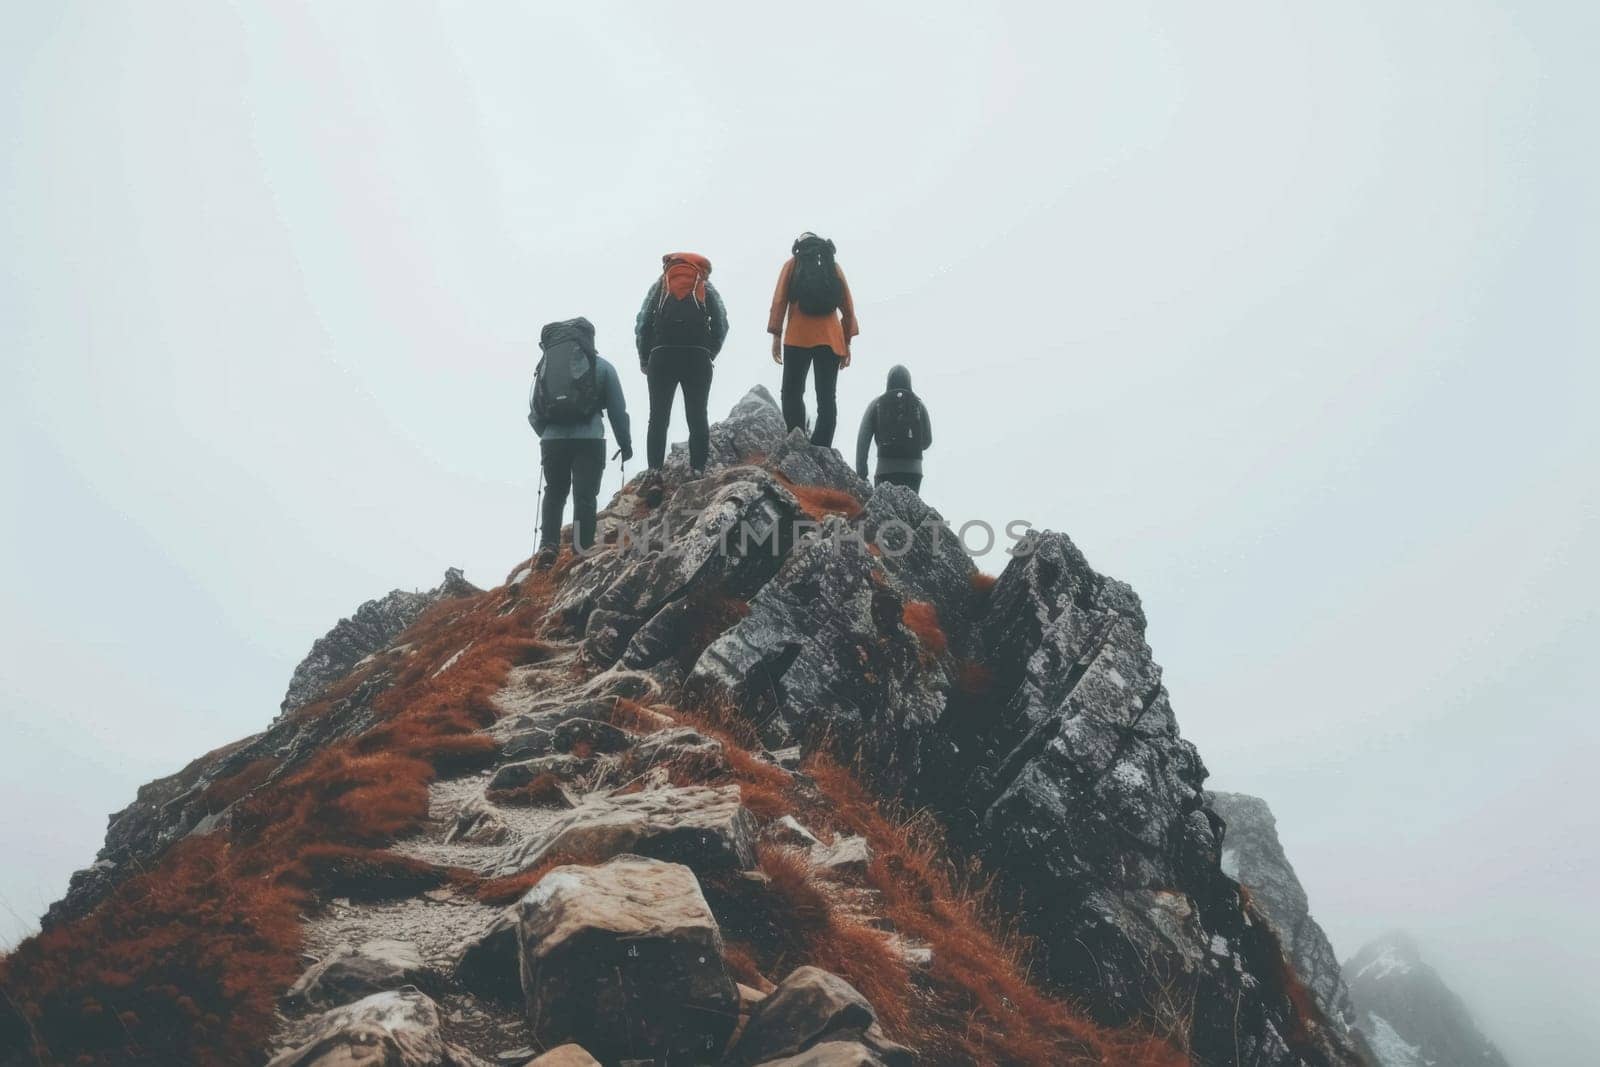 A group of friends reach the summit of a rugged mountain peak under a clear blue sky, showcasing the spirit of adventure and teamwork